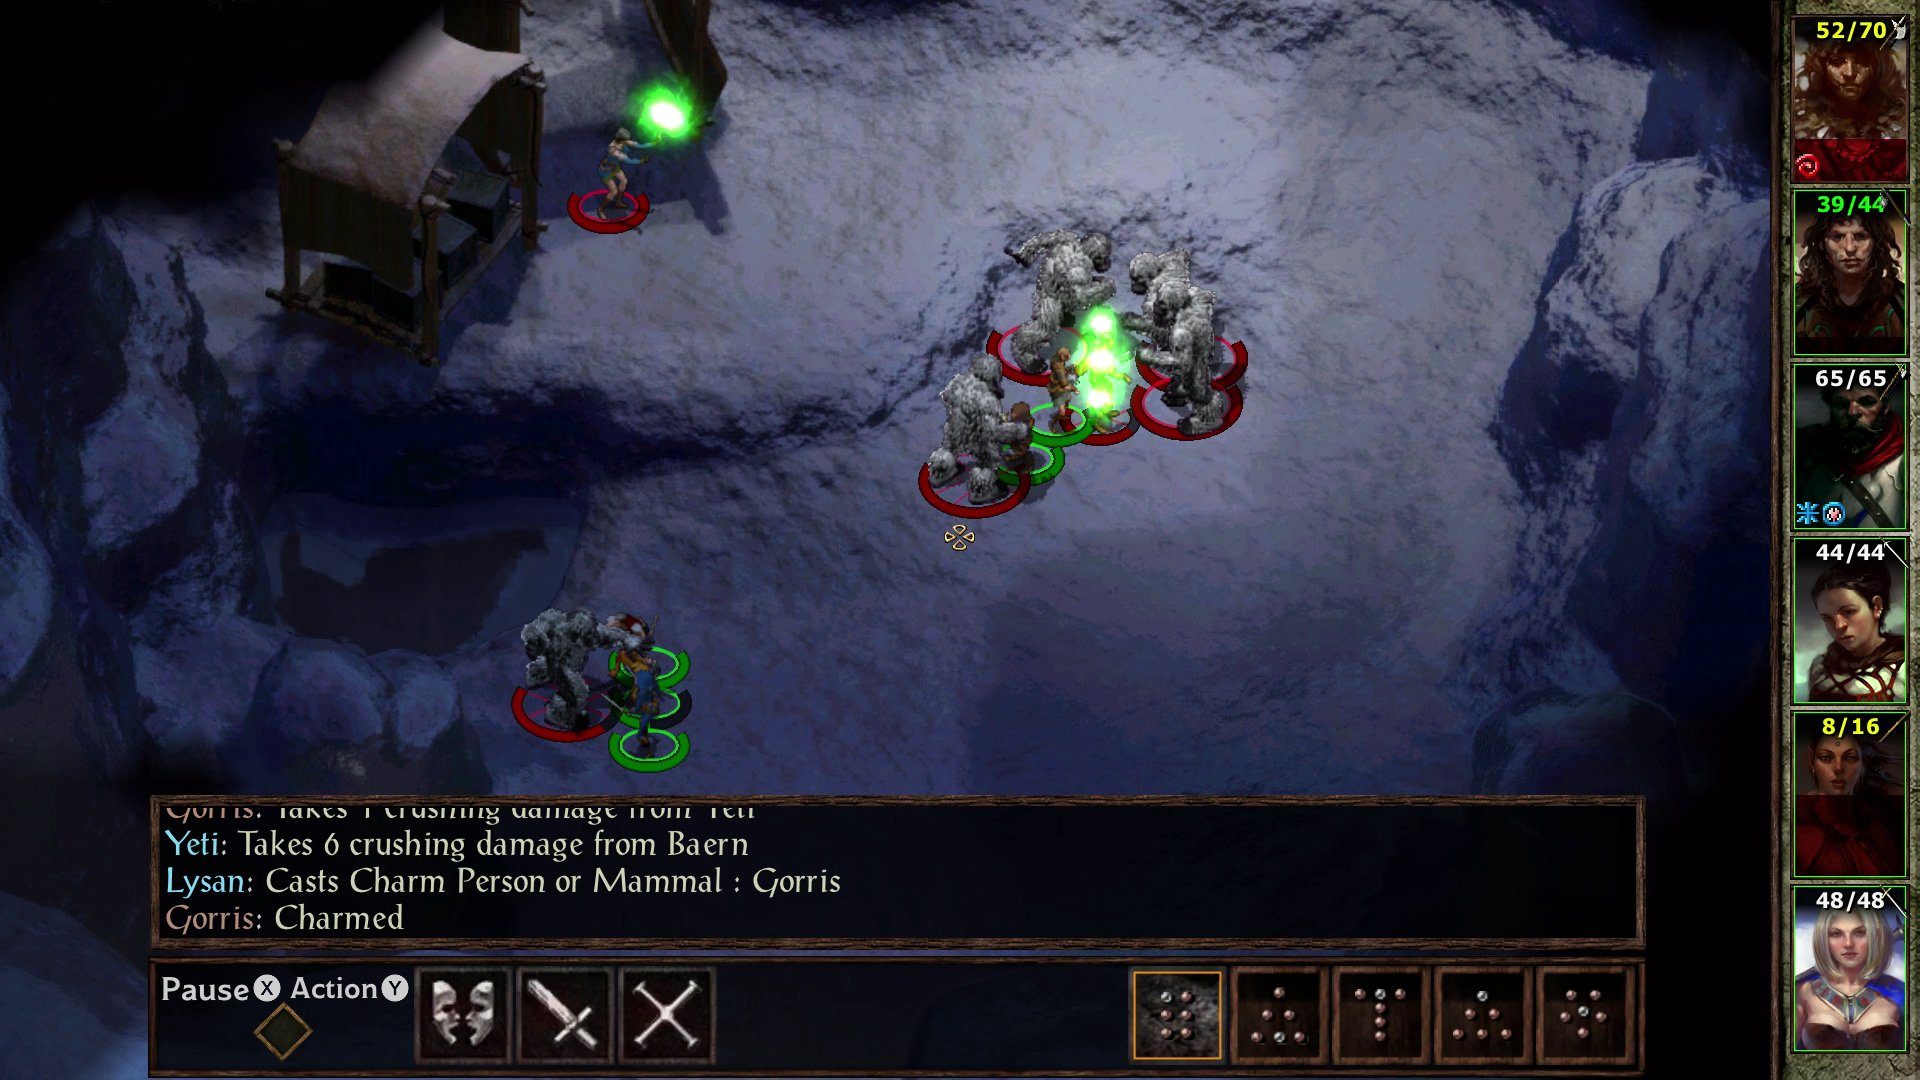 & Xbox One Planescape: Torment Icewind